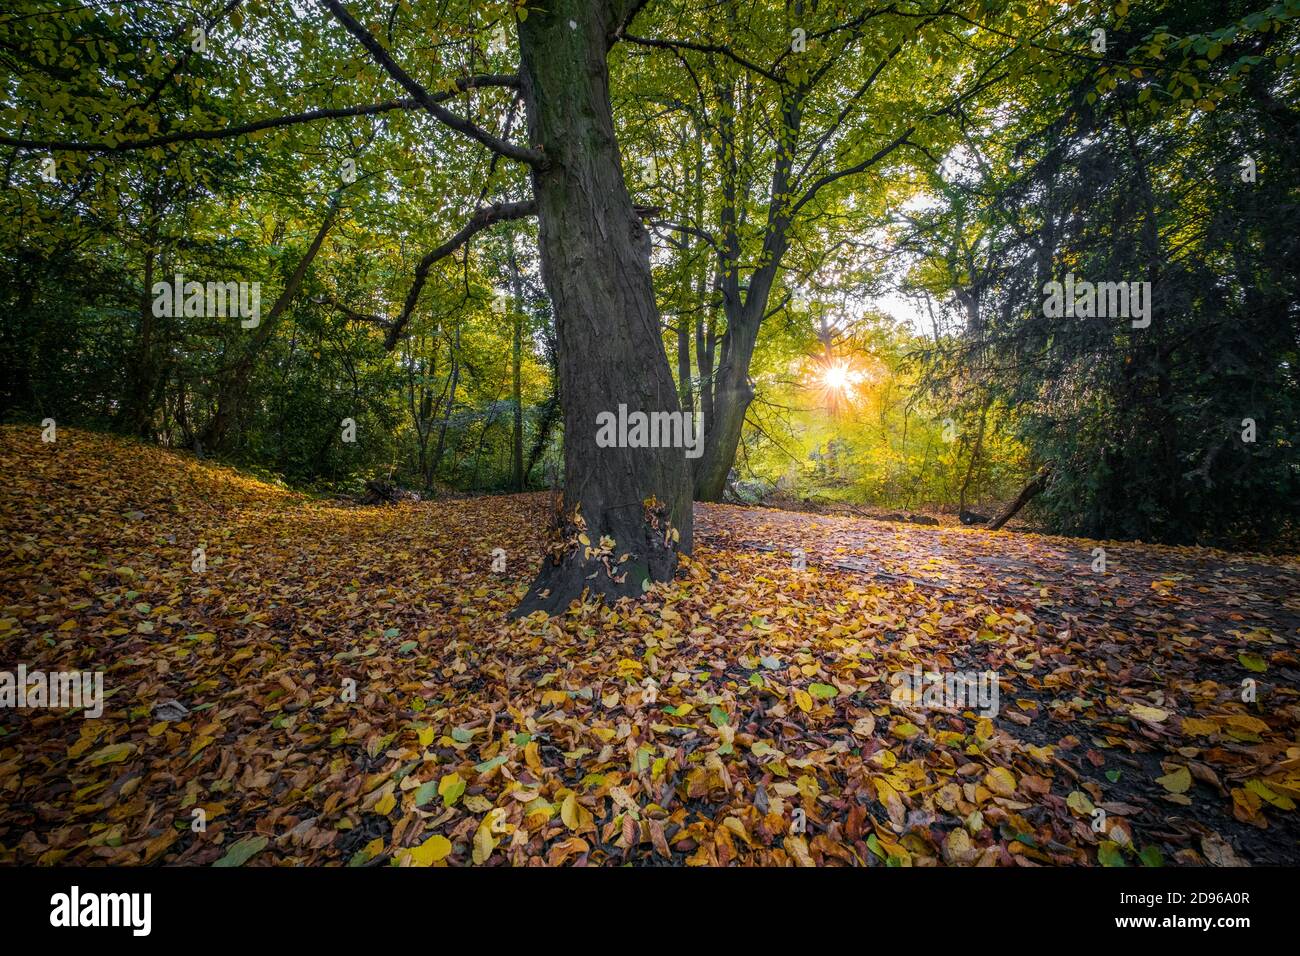 Europe, UK, England, low sunlight through Autumn leaves in beech woods, fallen leaves on the ground, no people Stock Photo